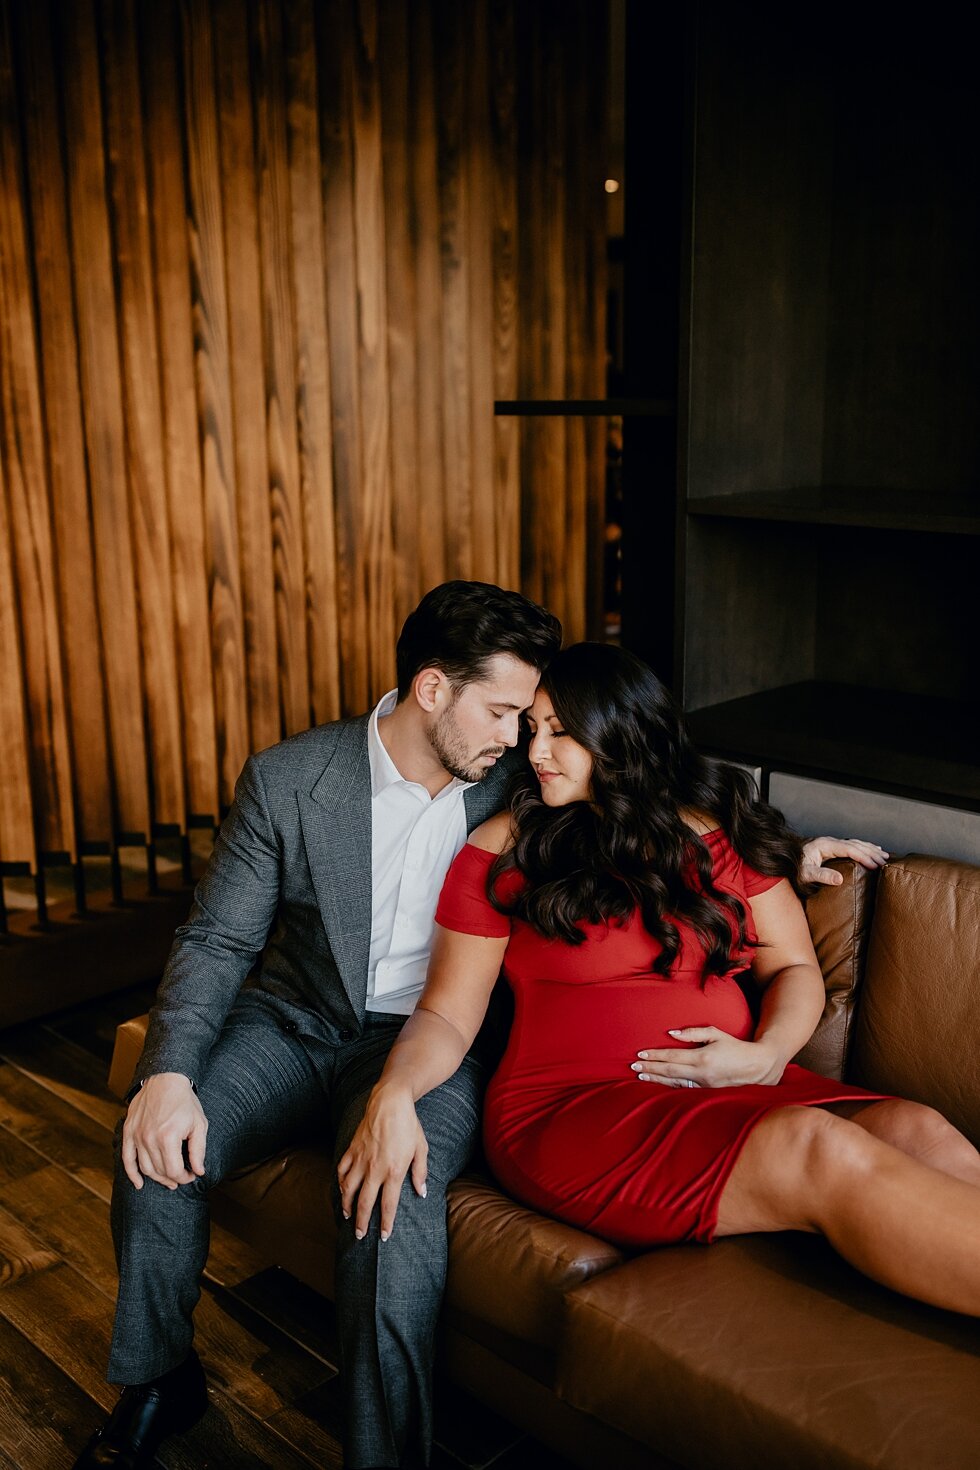  Setting the mood with a dimly lit atmosphere for elegant and romantic maternity session in Louisville, Kentucky. #maternitygoals #maternityphotographer #babybump #kentuckyphotographer #fancymaternitysession #dressymaternitysession #indianaphotograph